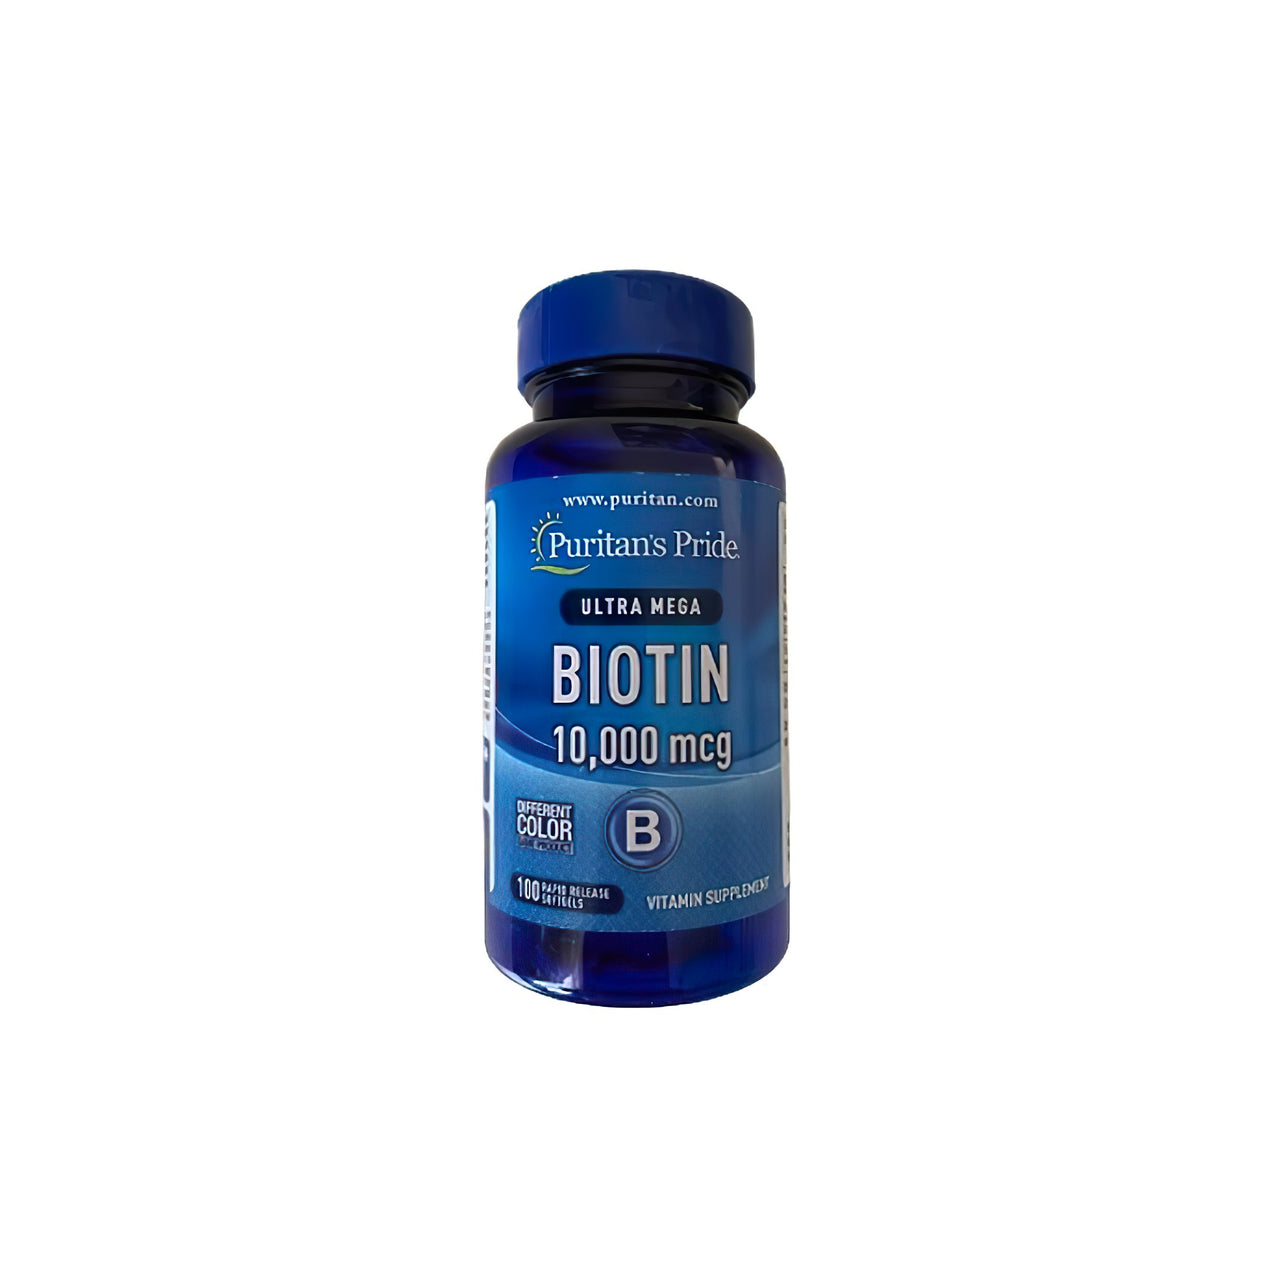 A nutrient-packed bottle of Puritan's Pride Biotin - 10000 mcg 100 softgels with a white background, formulated to boost energy levels and promote healthy hair.